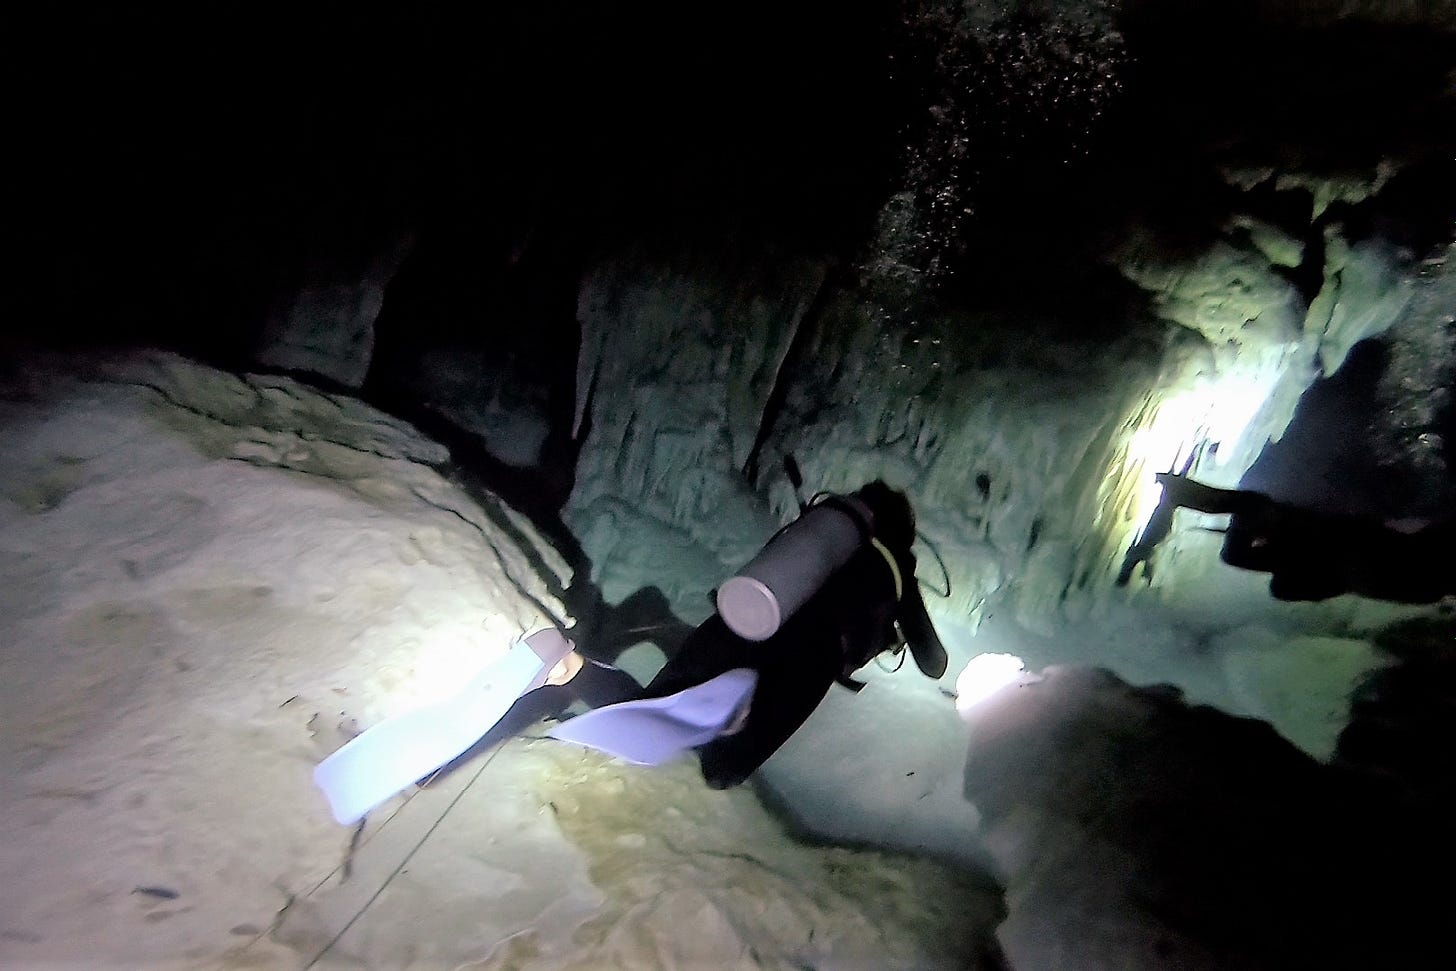 Divers in cenote